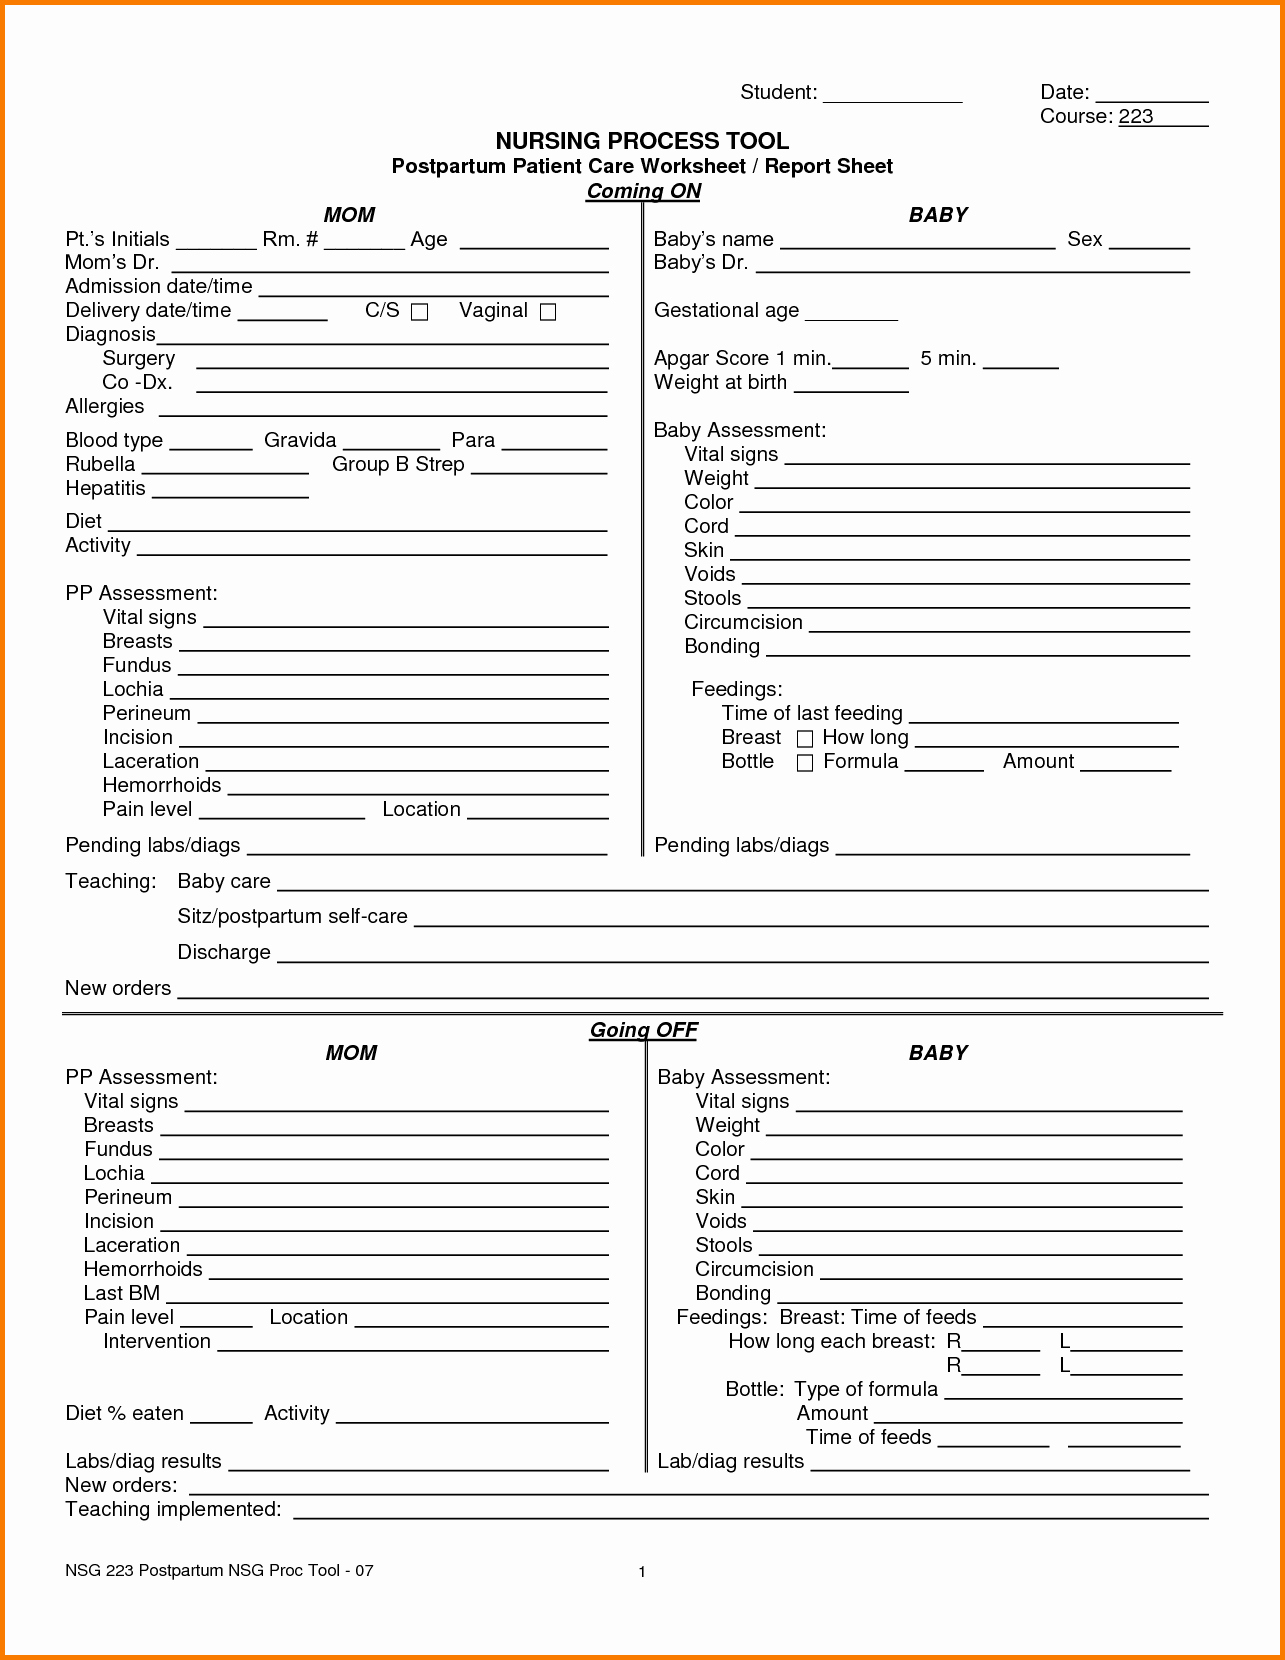 Printable Nurse Report Sheets That Are Critical | Darryl's Blog Within Nurse Report Sheet Templates